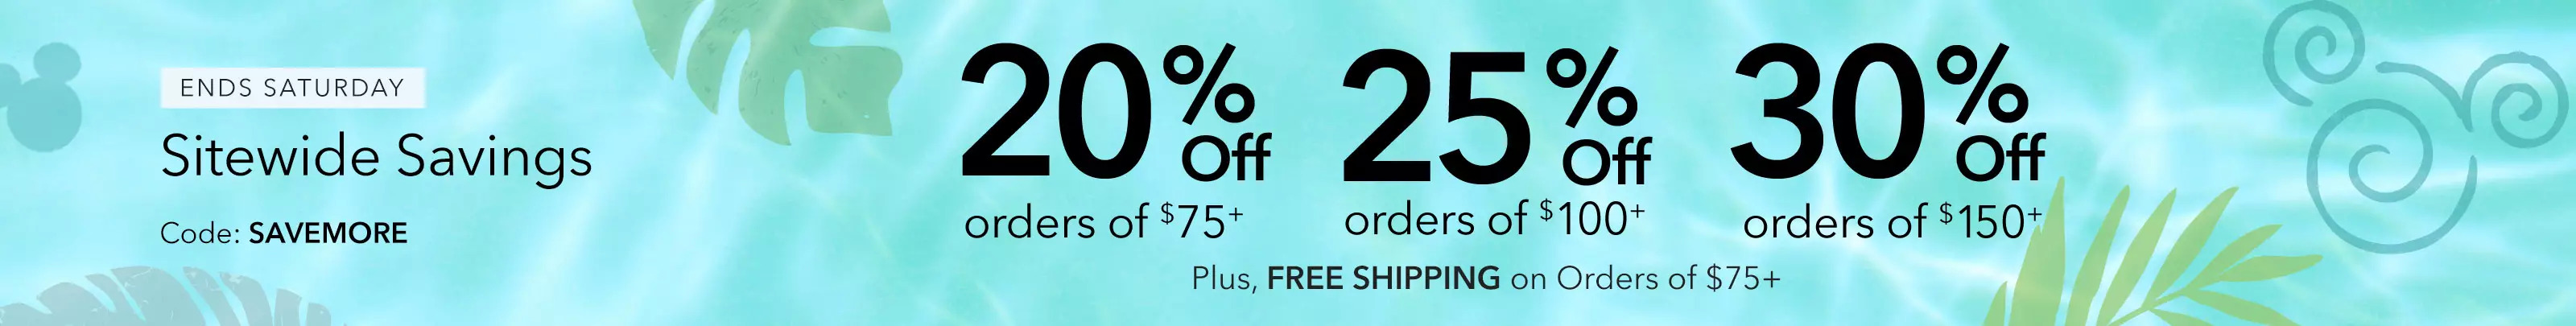 shopDisney: 20% Off $75, 25% Off $100, 30% Off $150 or More + Free Shipping on $75+